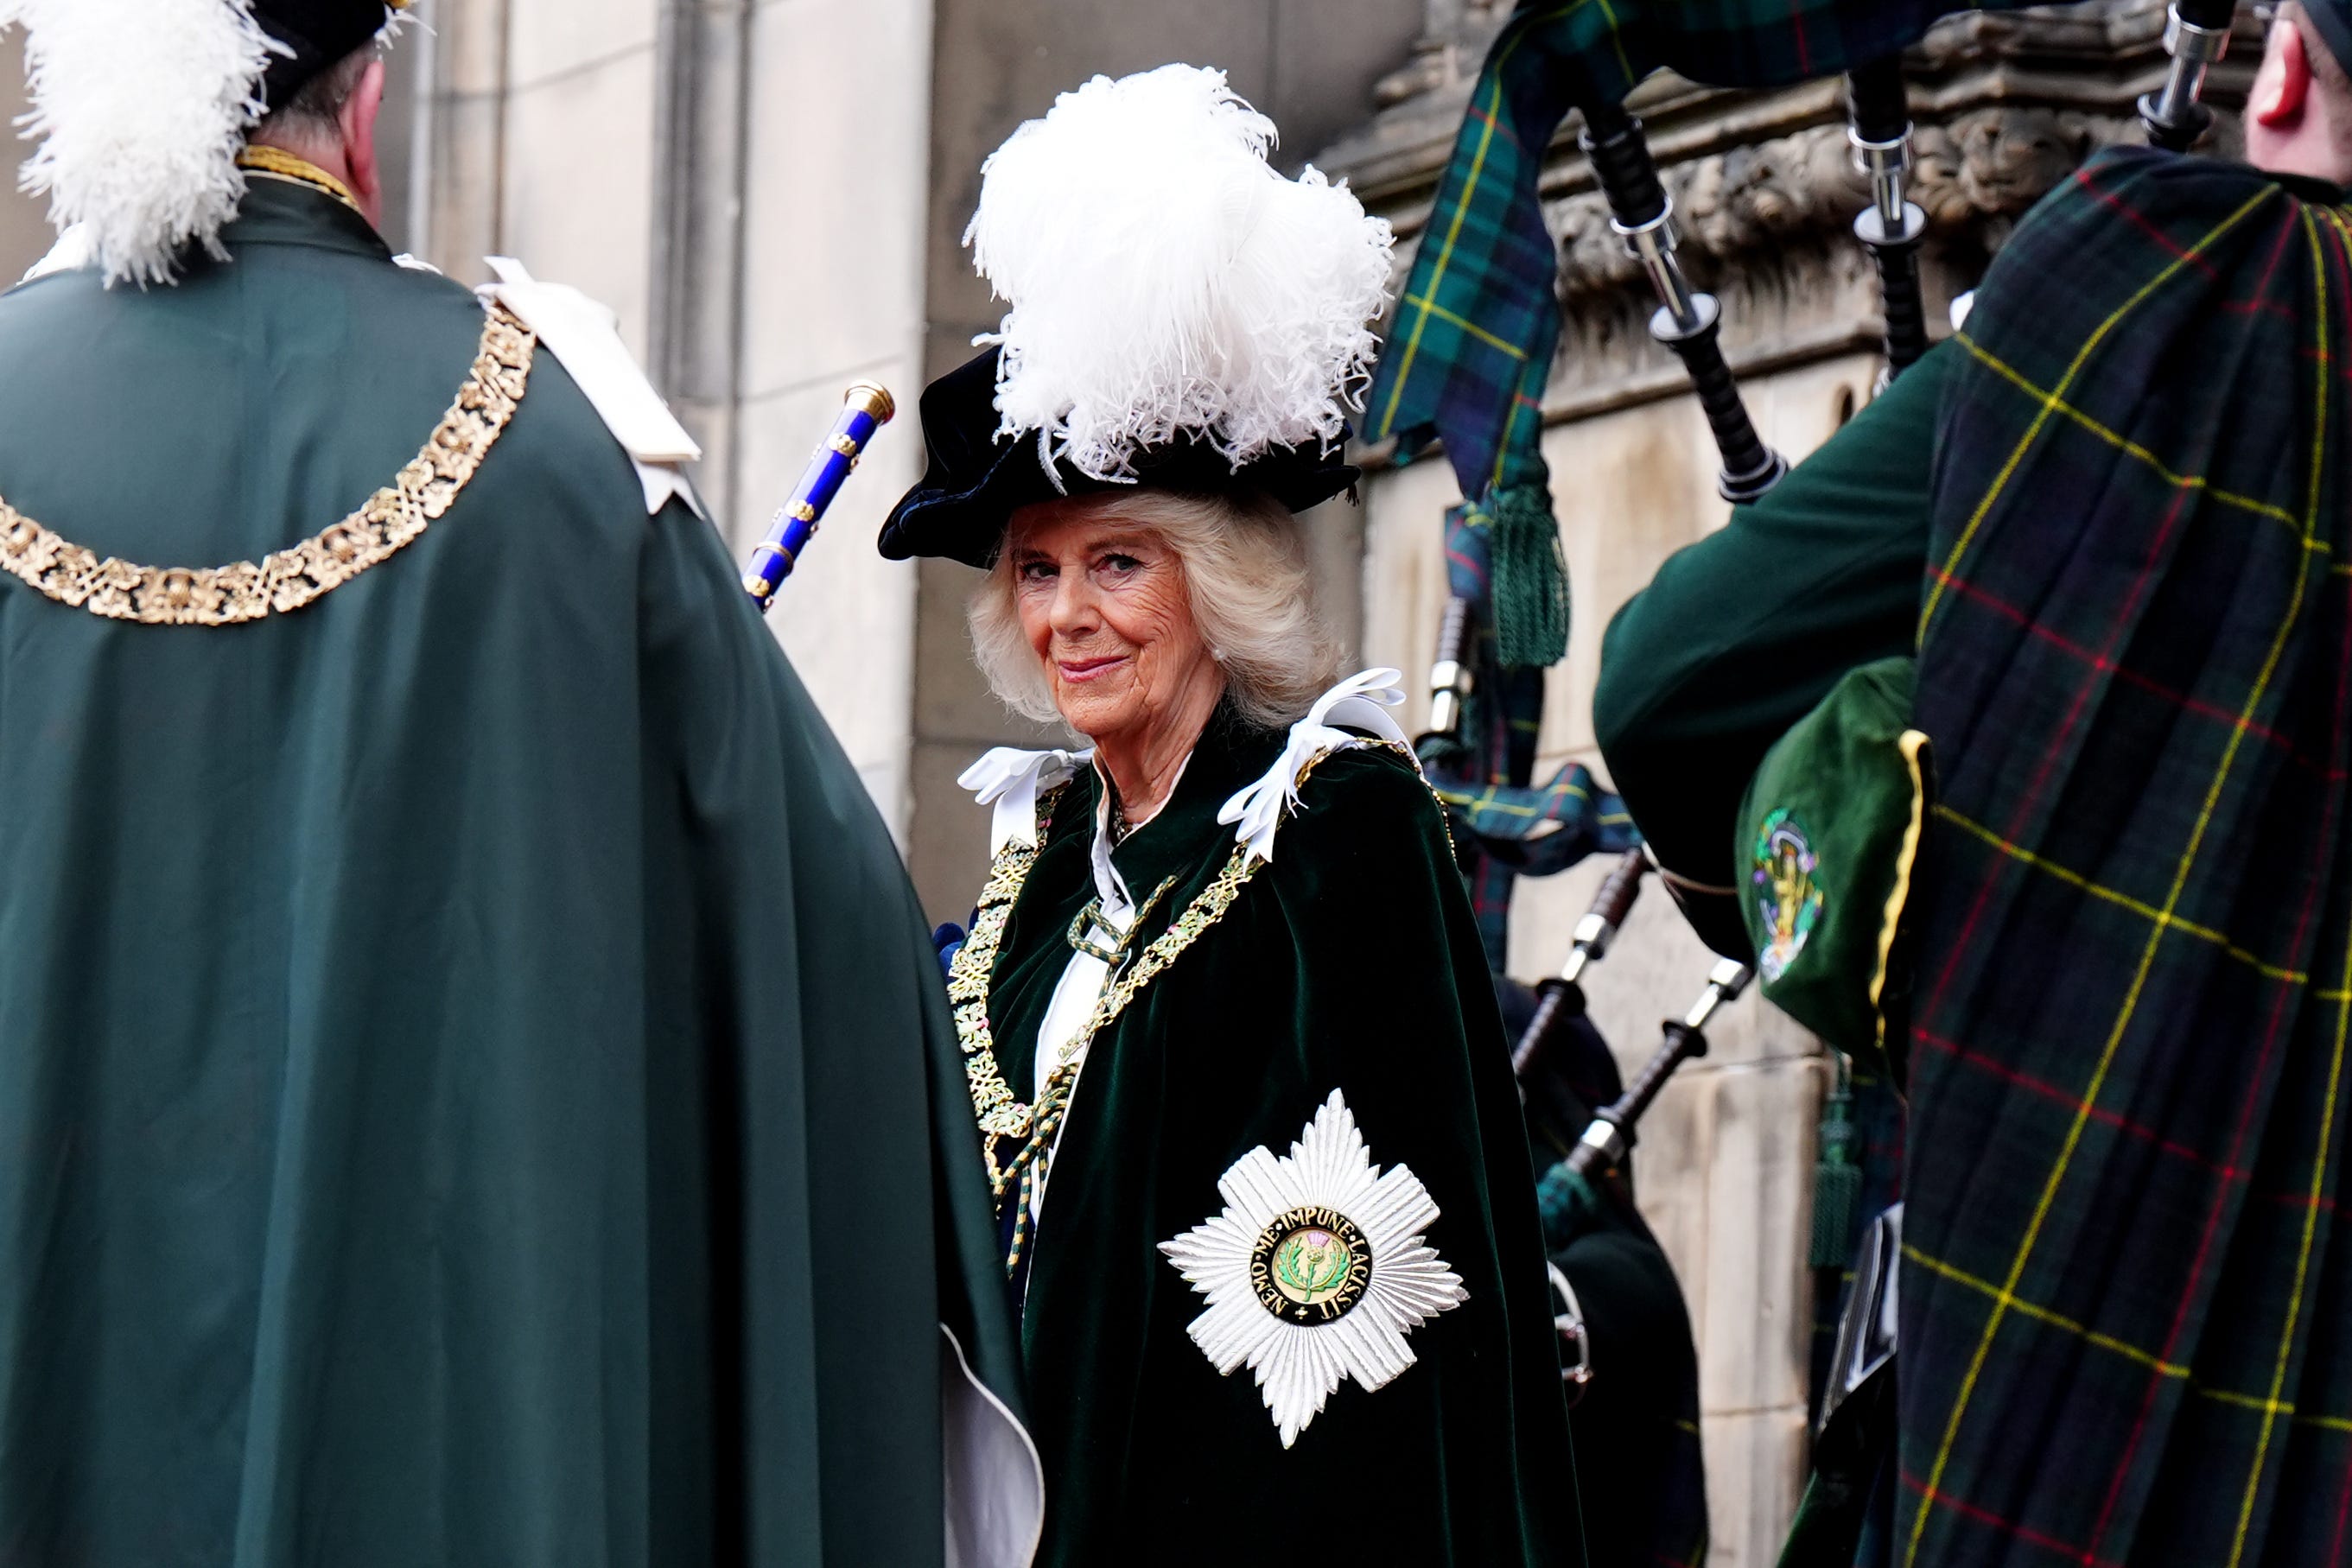 The Queen leaving the Order of the Thistle service at St Giles’ Cathedral in Edinburgh (Andrew Milligan/PA)